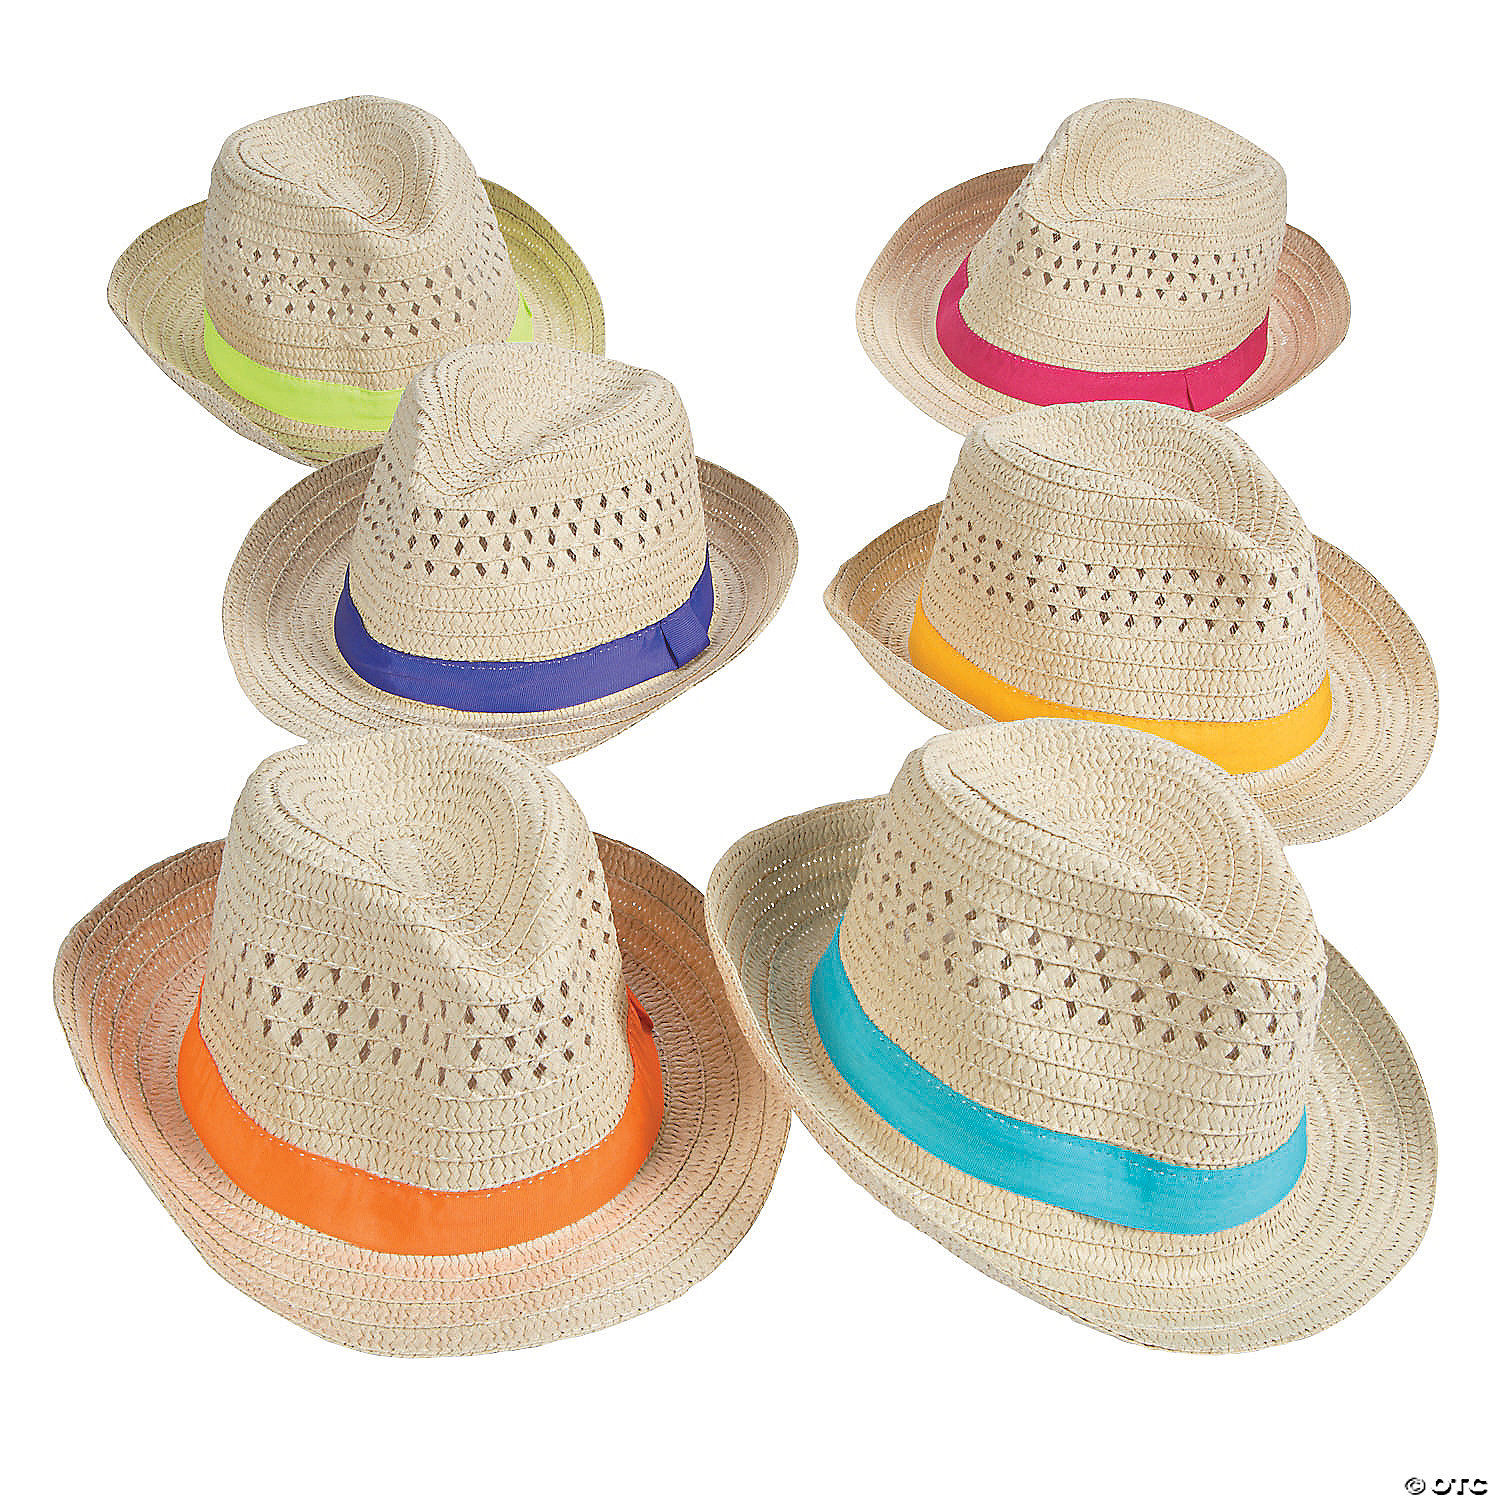 https://s7.orientaltrading.com/is/image/OrientalTrading/VIEWER_ZOOM/fedoras-with-colorful-band-12-pc-~13772327